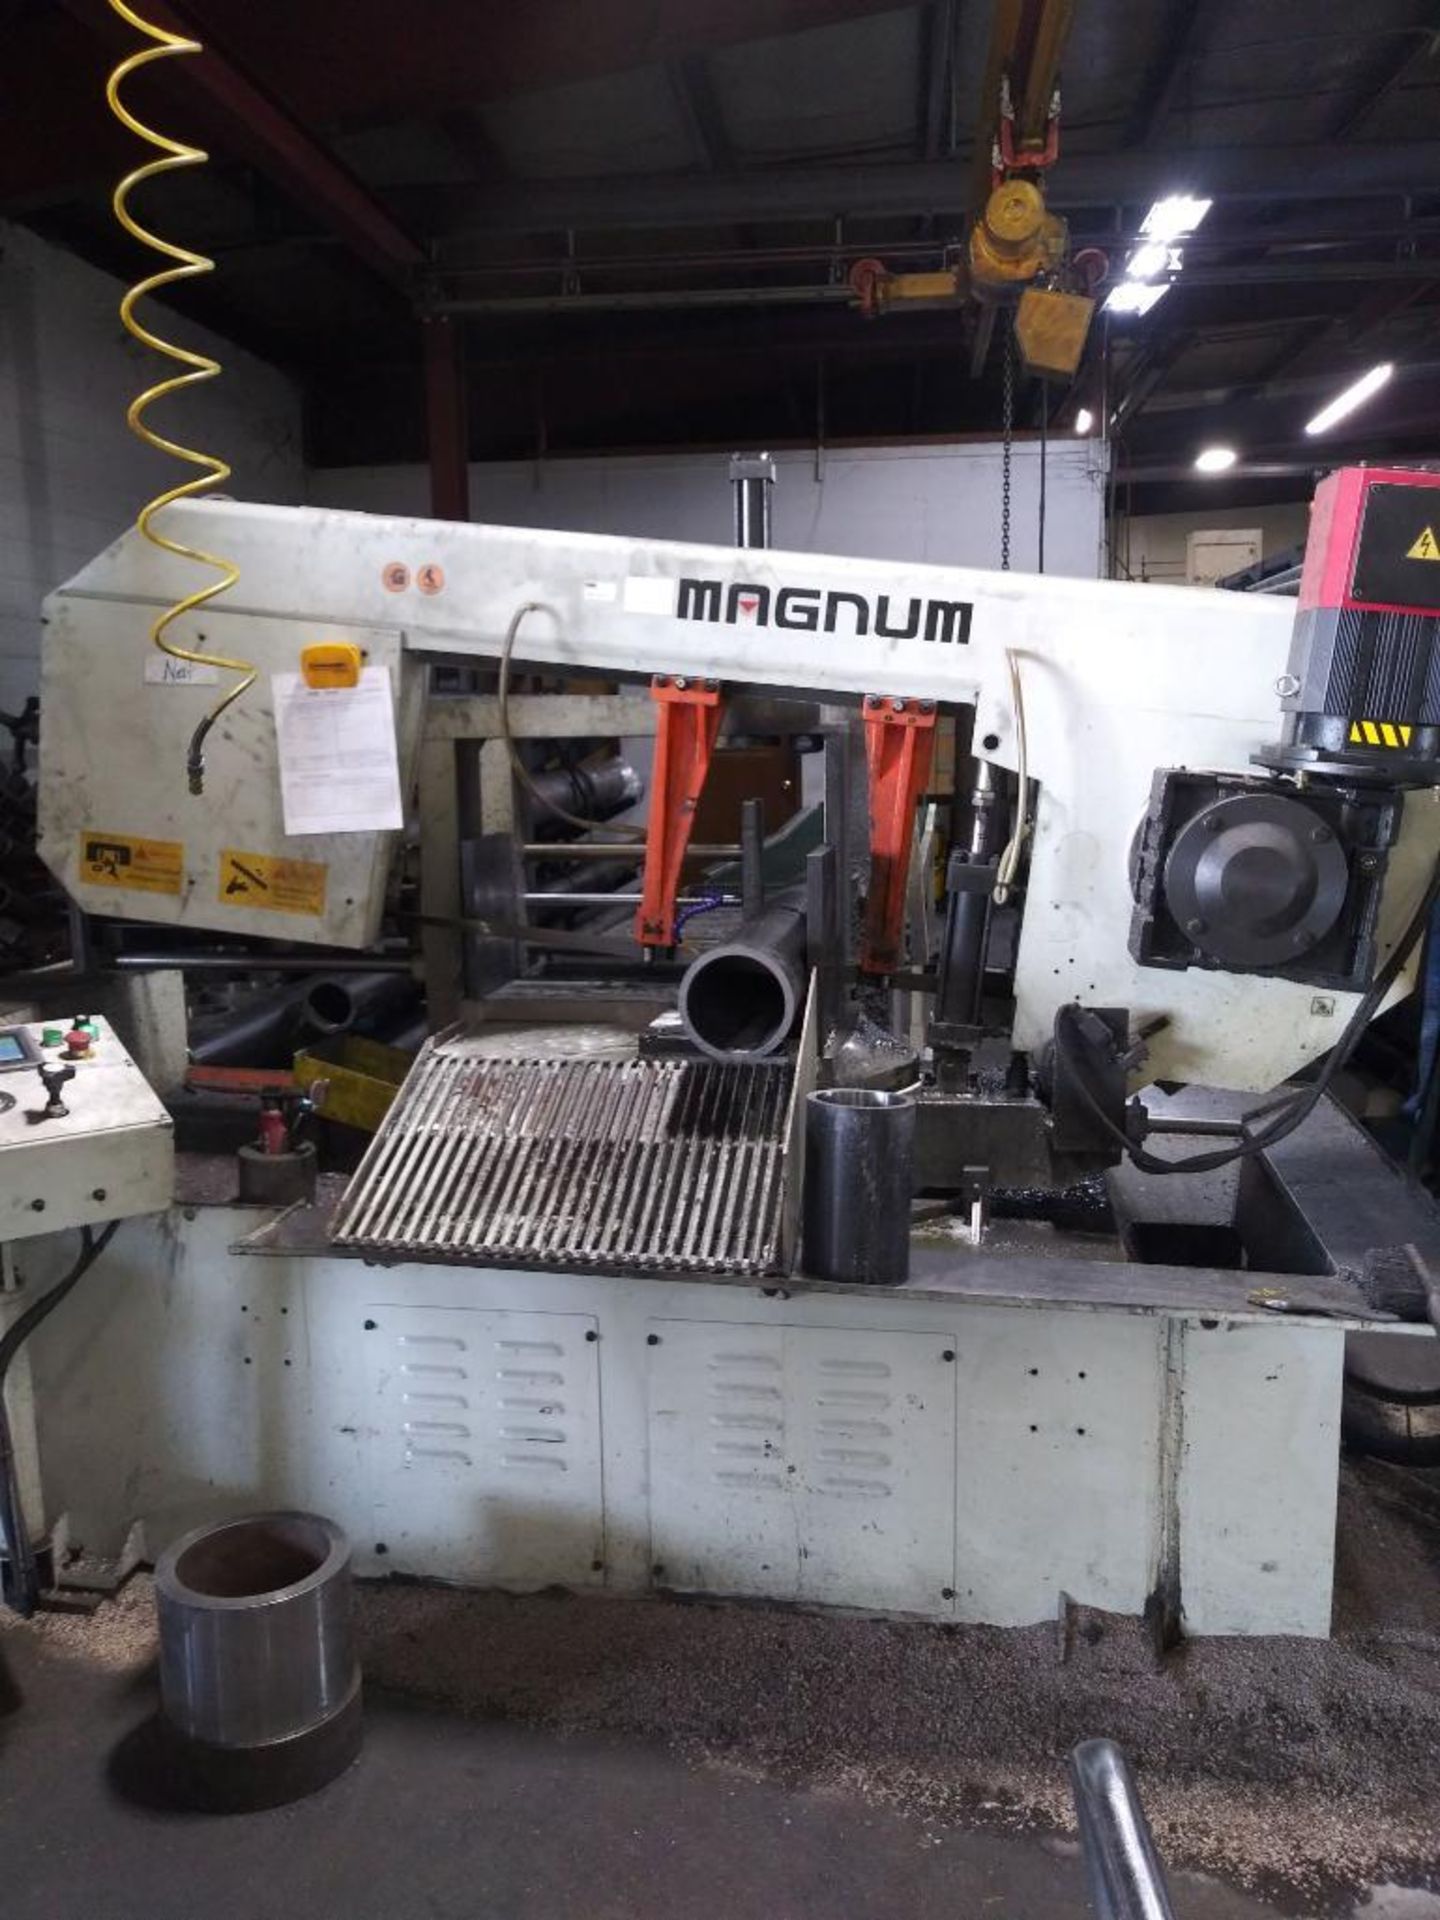 2021 Magnum CNC Horizontal Band Saw, Model BS-2618A, S/N A21030839 (Located at 2201 Hwy 31 SW, Harts